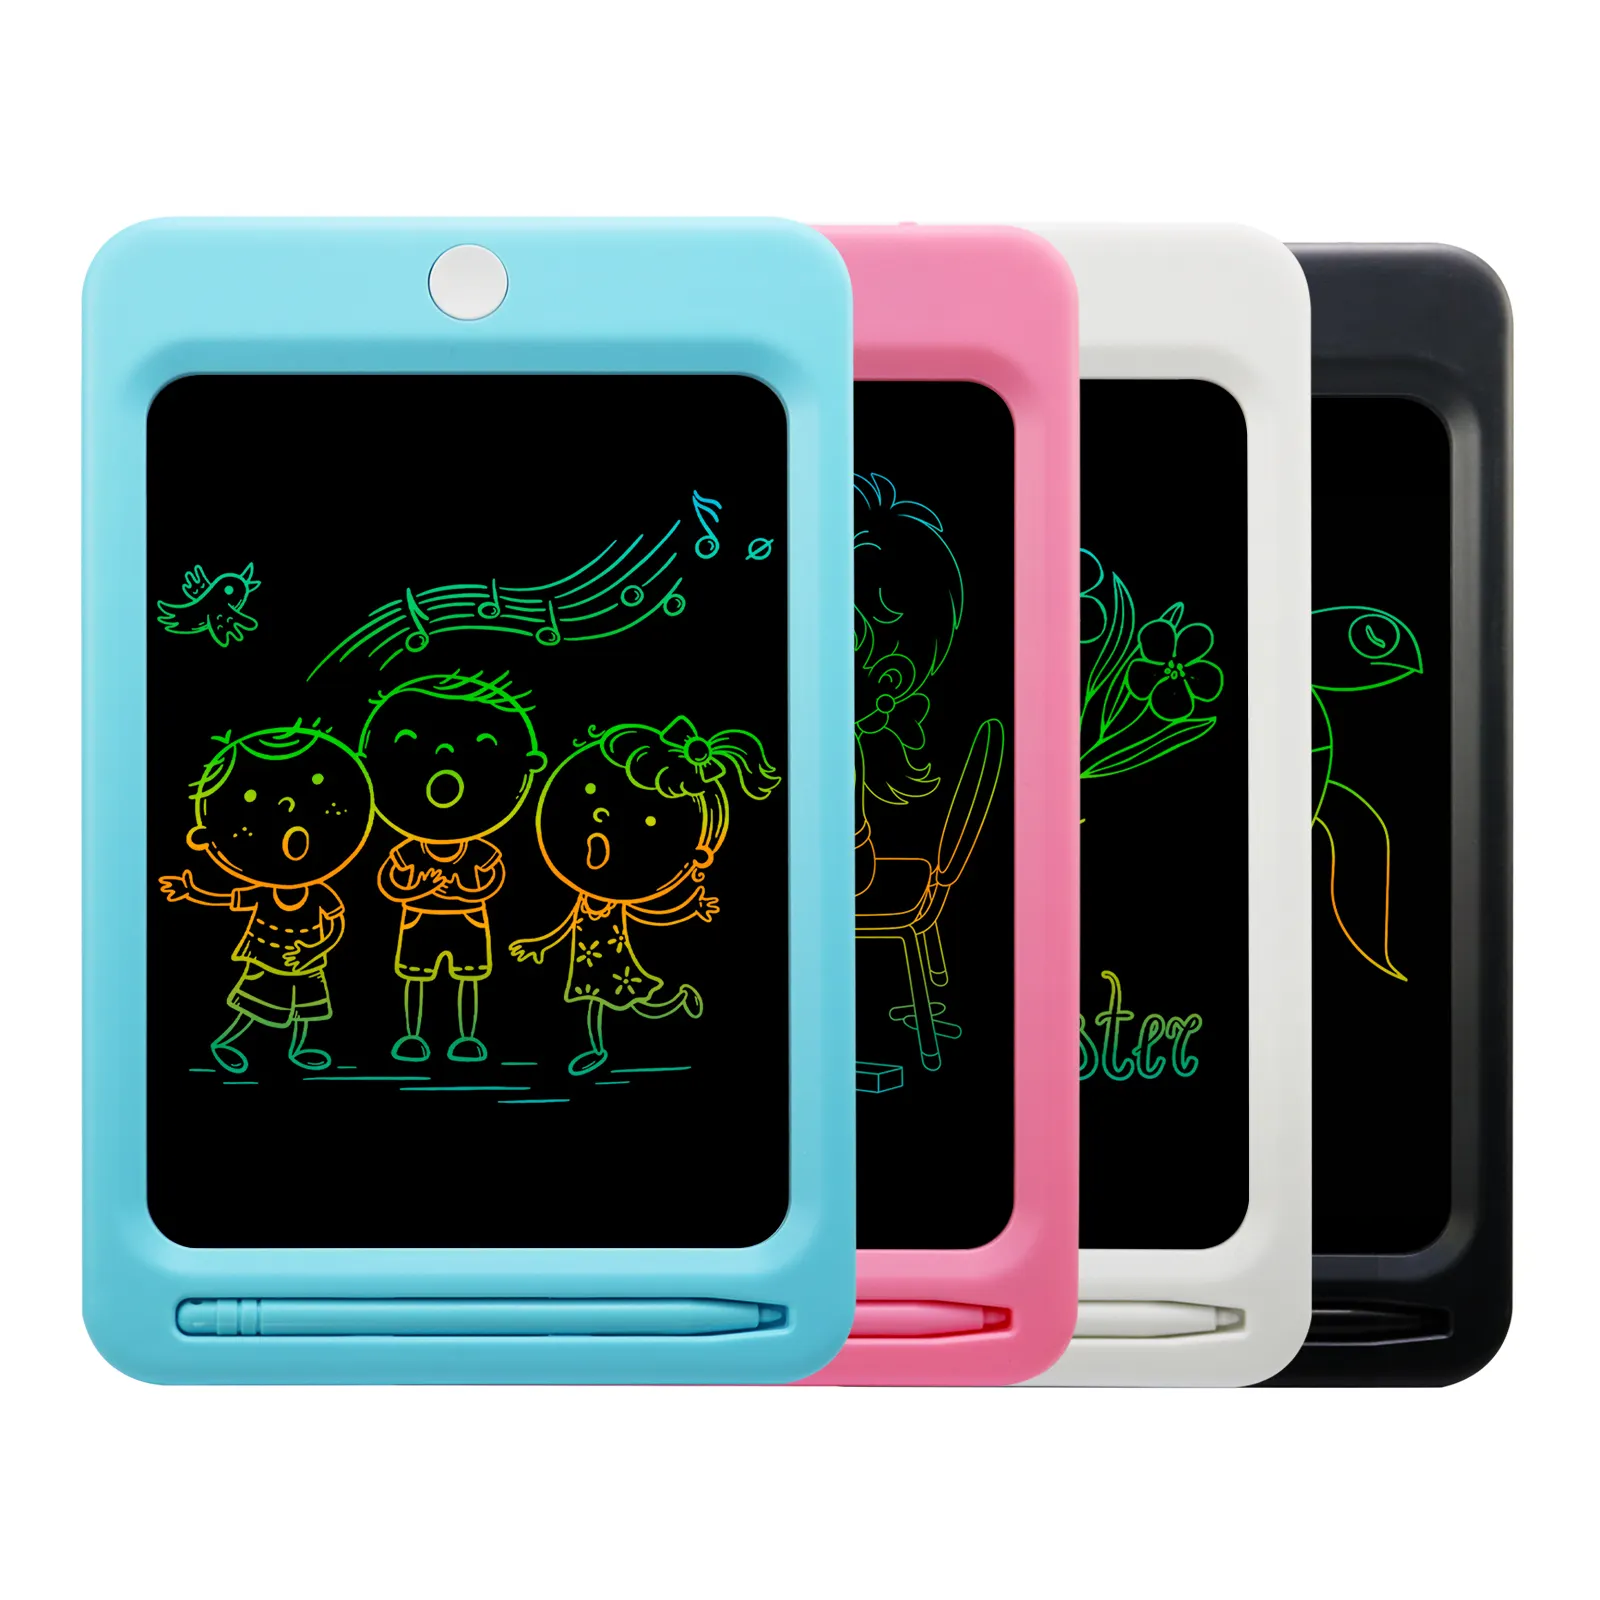 8.5 inch LCD Writing Tablet Kids Drawing toys Doodle board rewrite write pad Christmas gifts